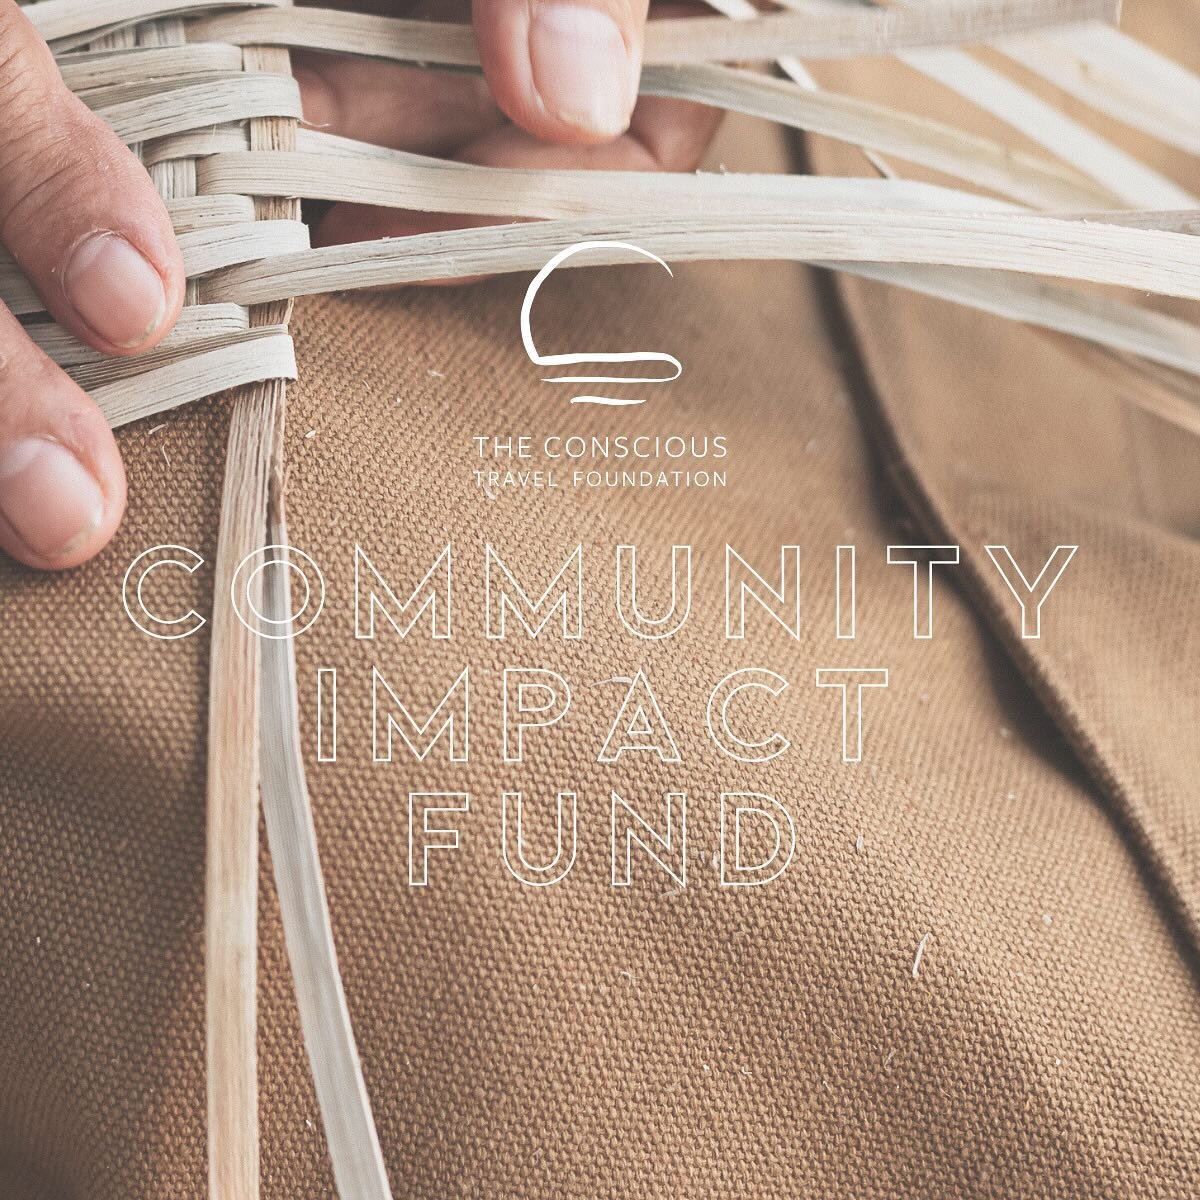 Later this month, we will be announcing the two recipients of our Community Impact Fund. We&rsquo;ve been blown away by the quality of the applications we received, and our philanthropy committee has enjoyed learning more about these incredible initi